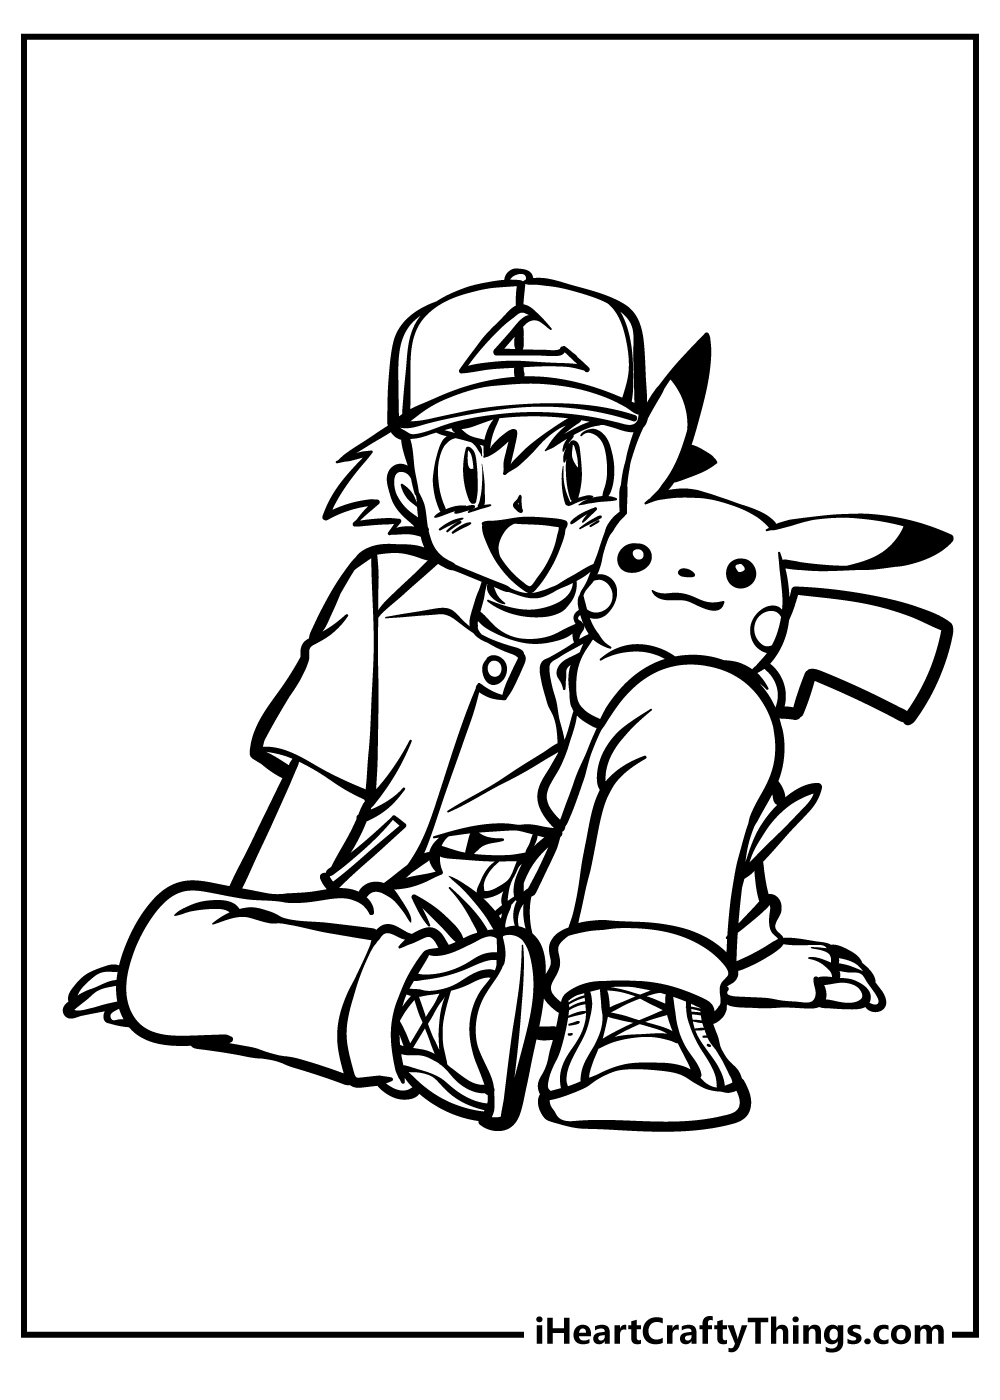 Pokemon Coloring Pages for kids free download